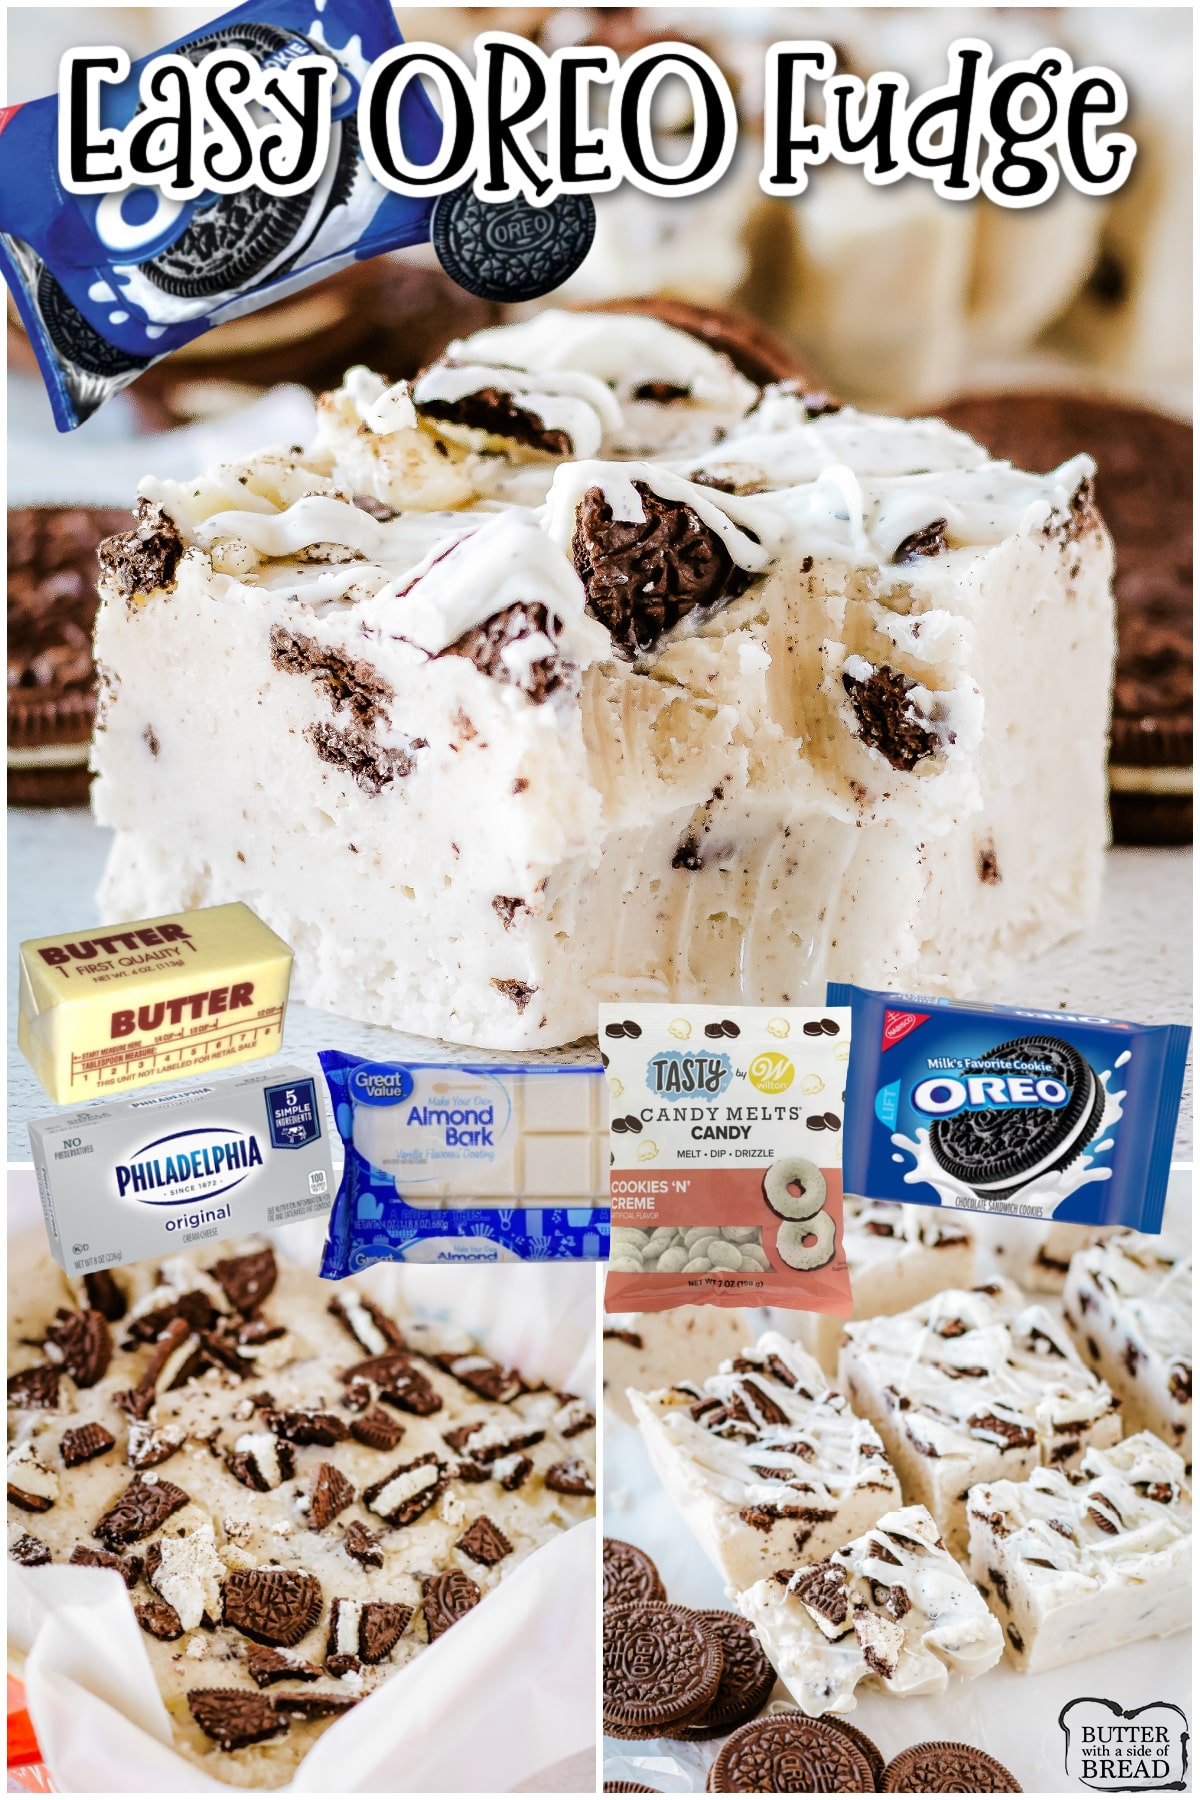 Oreo Fudge made with just 5 ingredients with delightful cookies & cream flavor! White chocolate Oreo fudge is made with cream cheese, white chocolate, & Oreos in every bite!